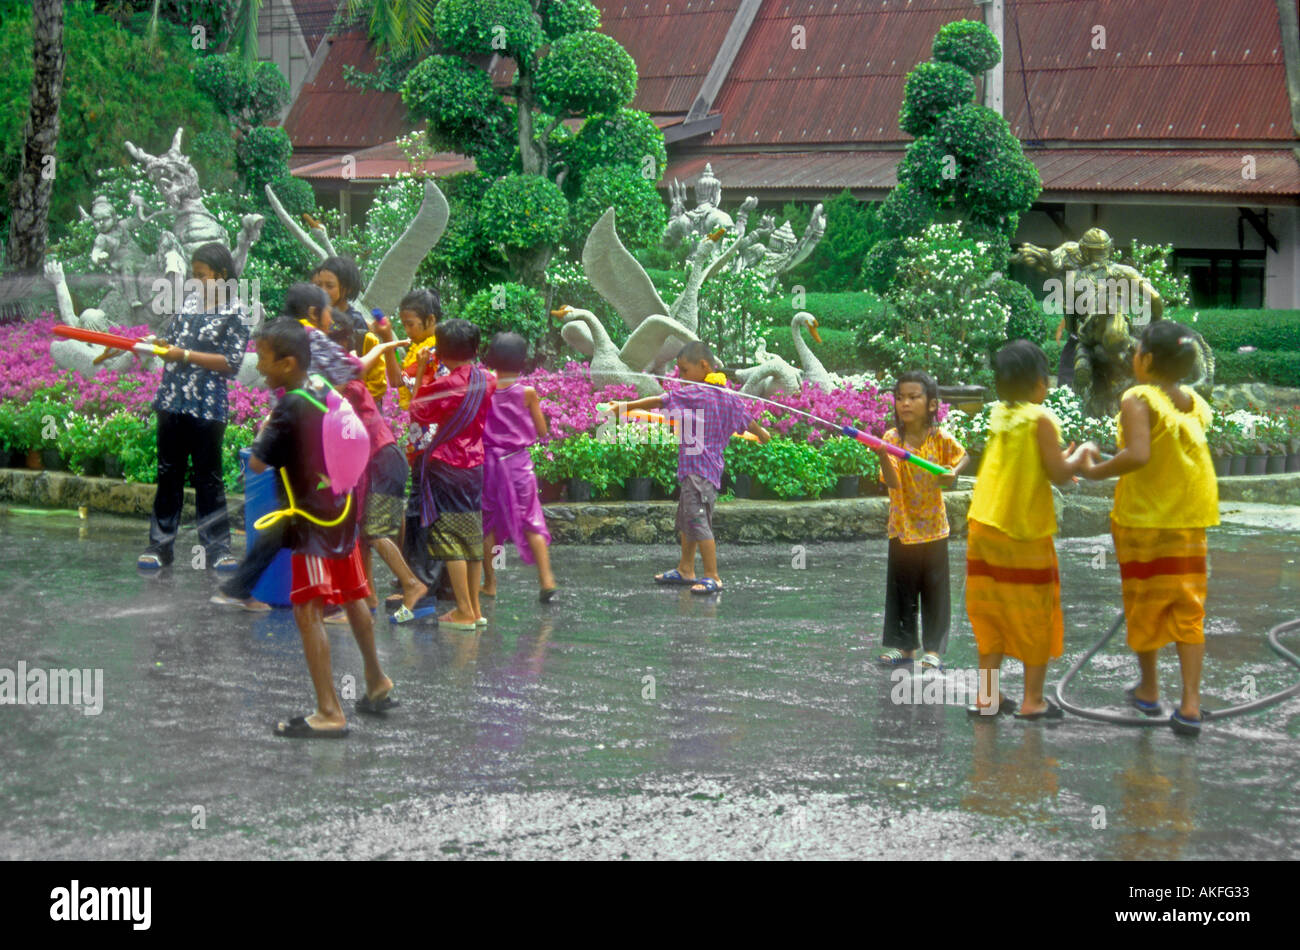 Songkran, children mixed age spraying water with portable water cannons, boy wearing water gun back pack, Nong Nooch Theme Park, Pattaya, Thailand Stock Photo